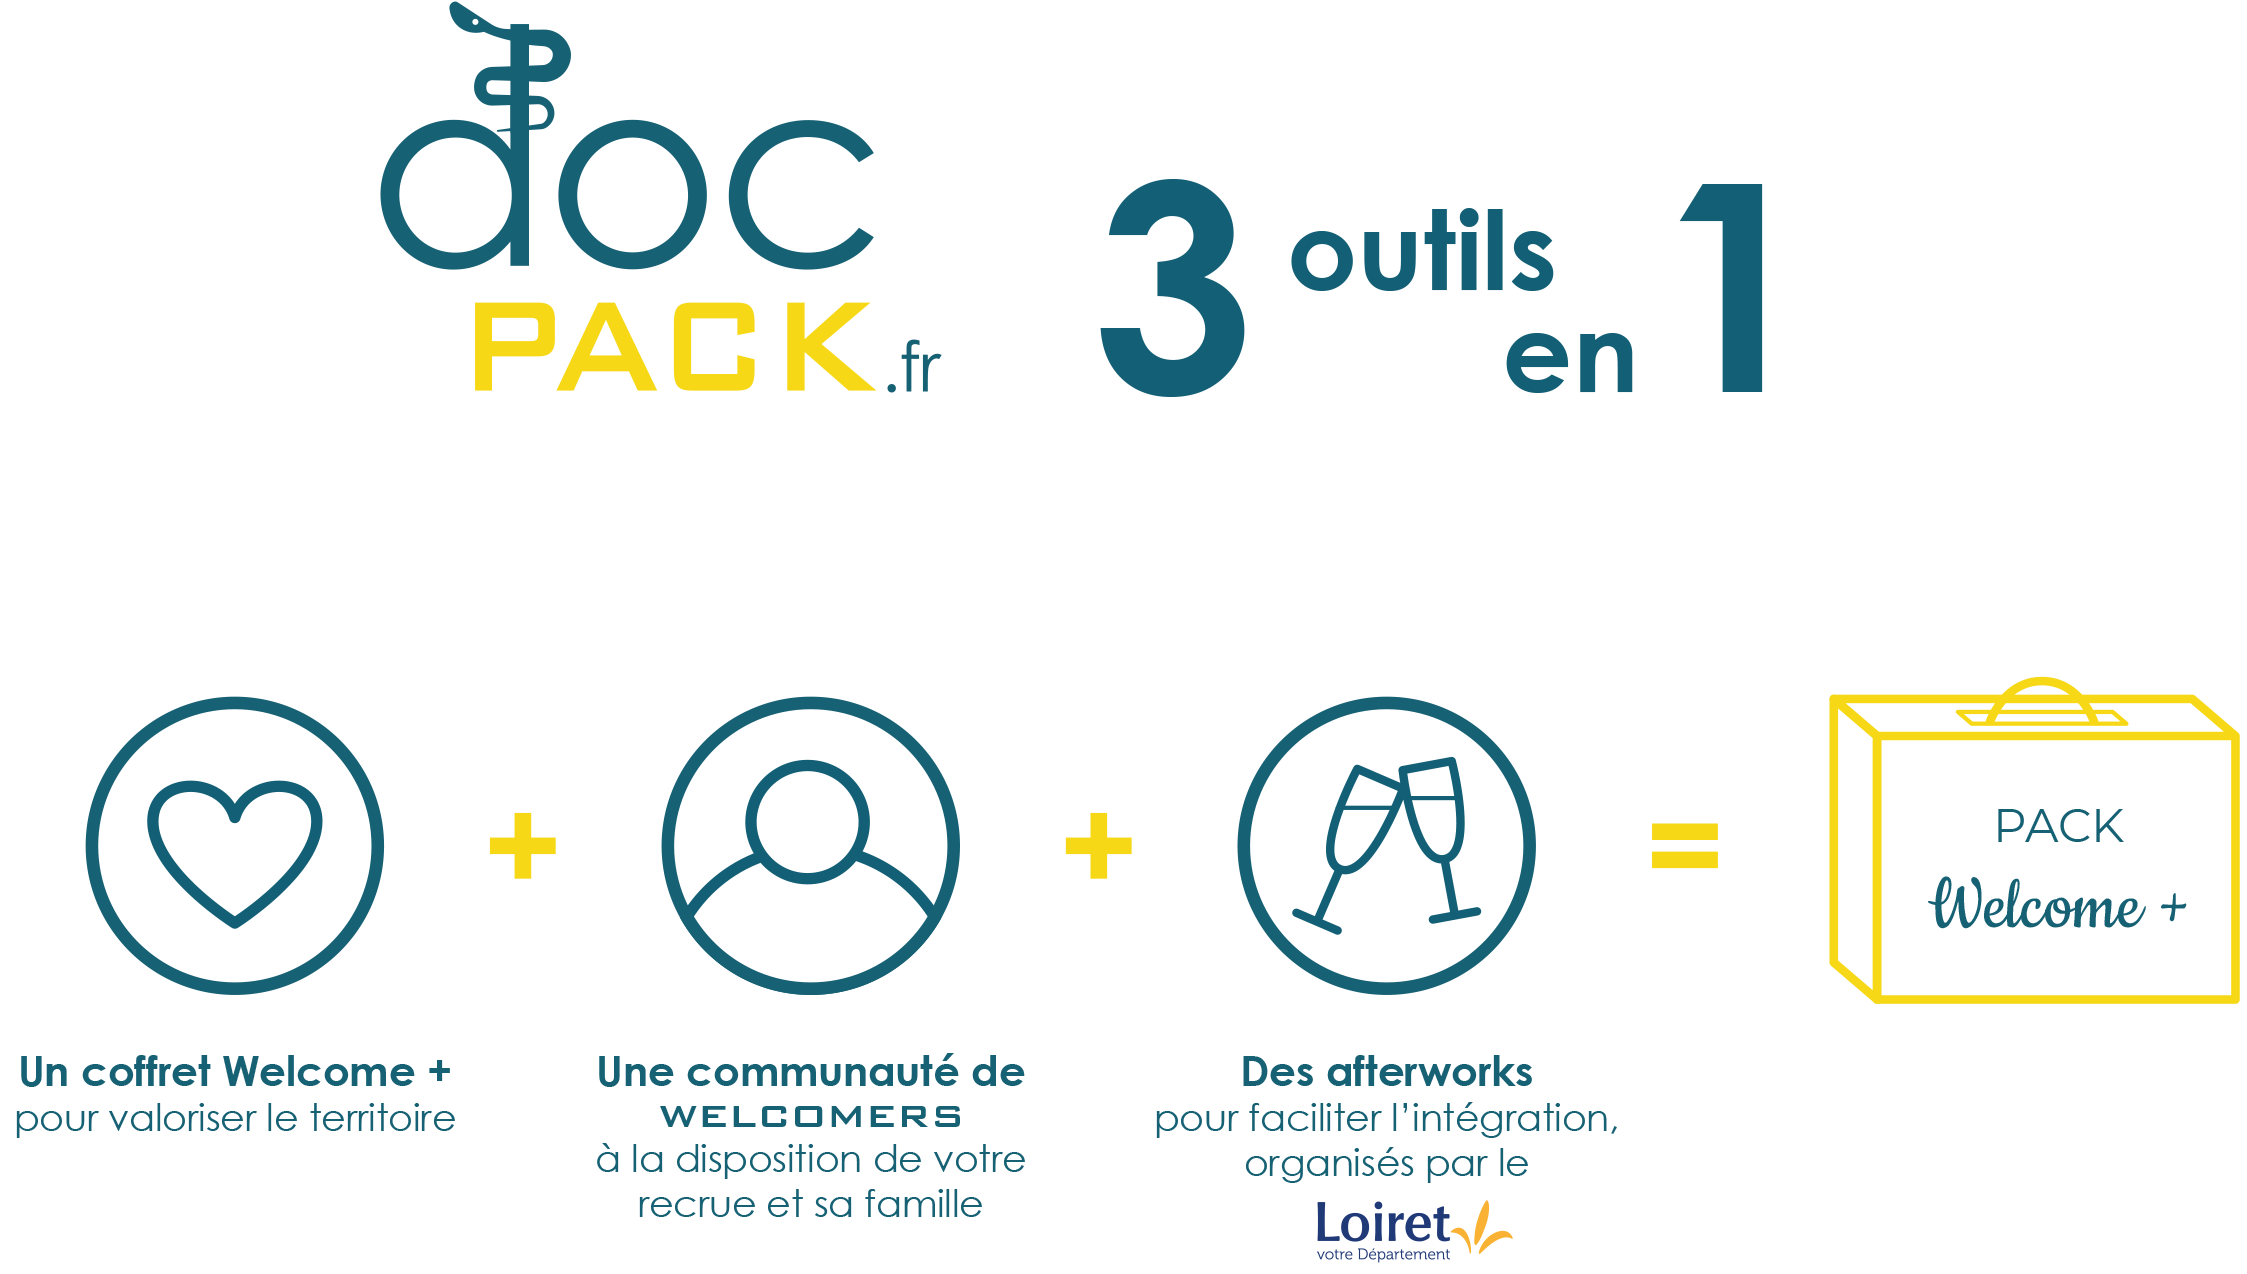 Docpack-3outils